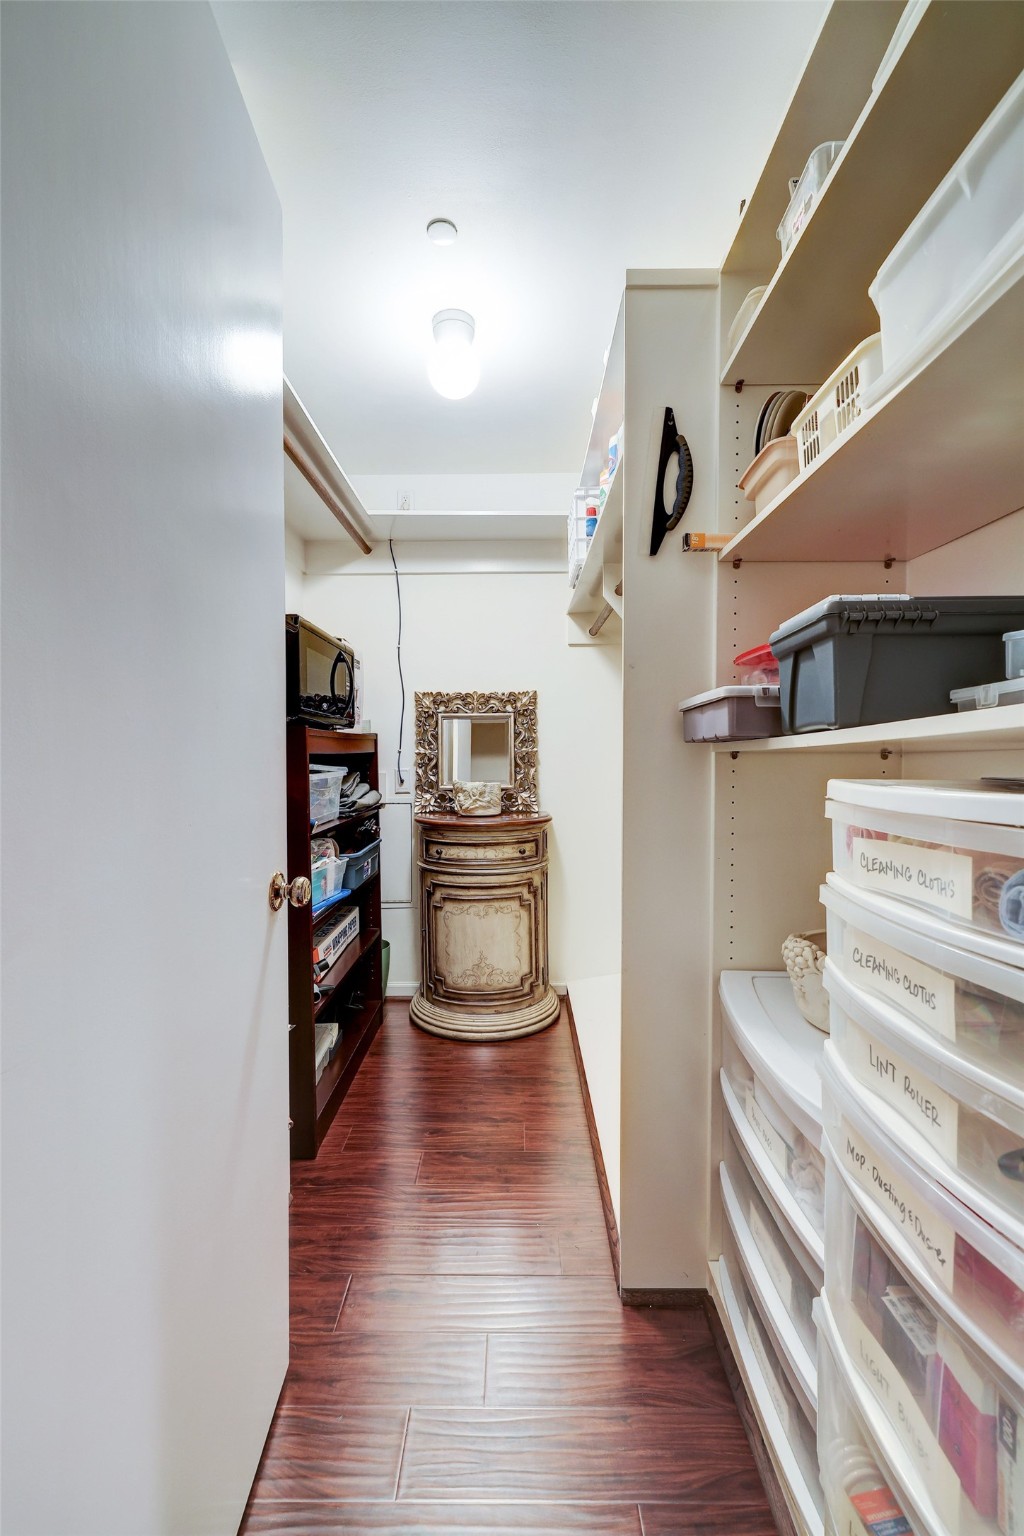 Storage closet off of main hallway with built in shelves and two hanging areas.